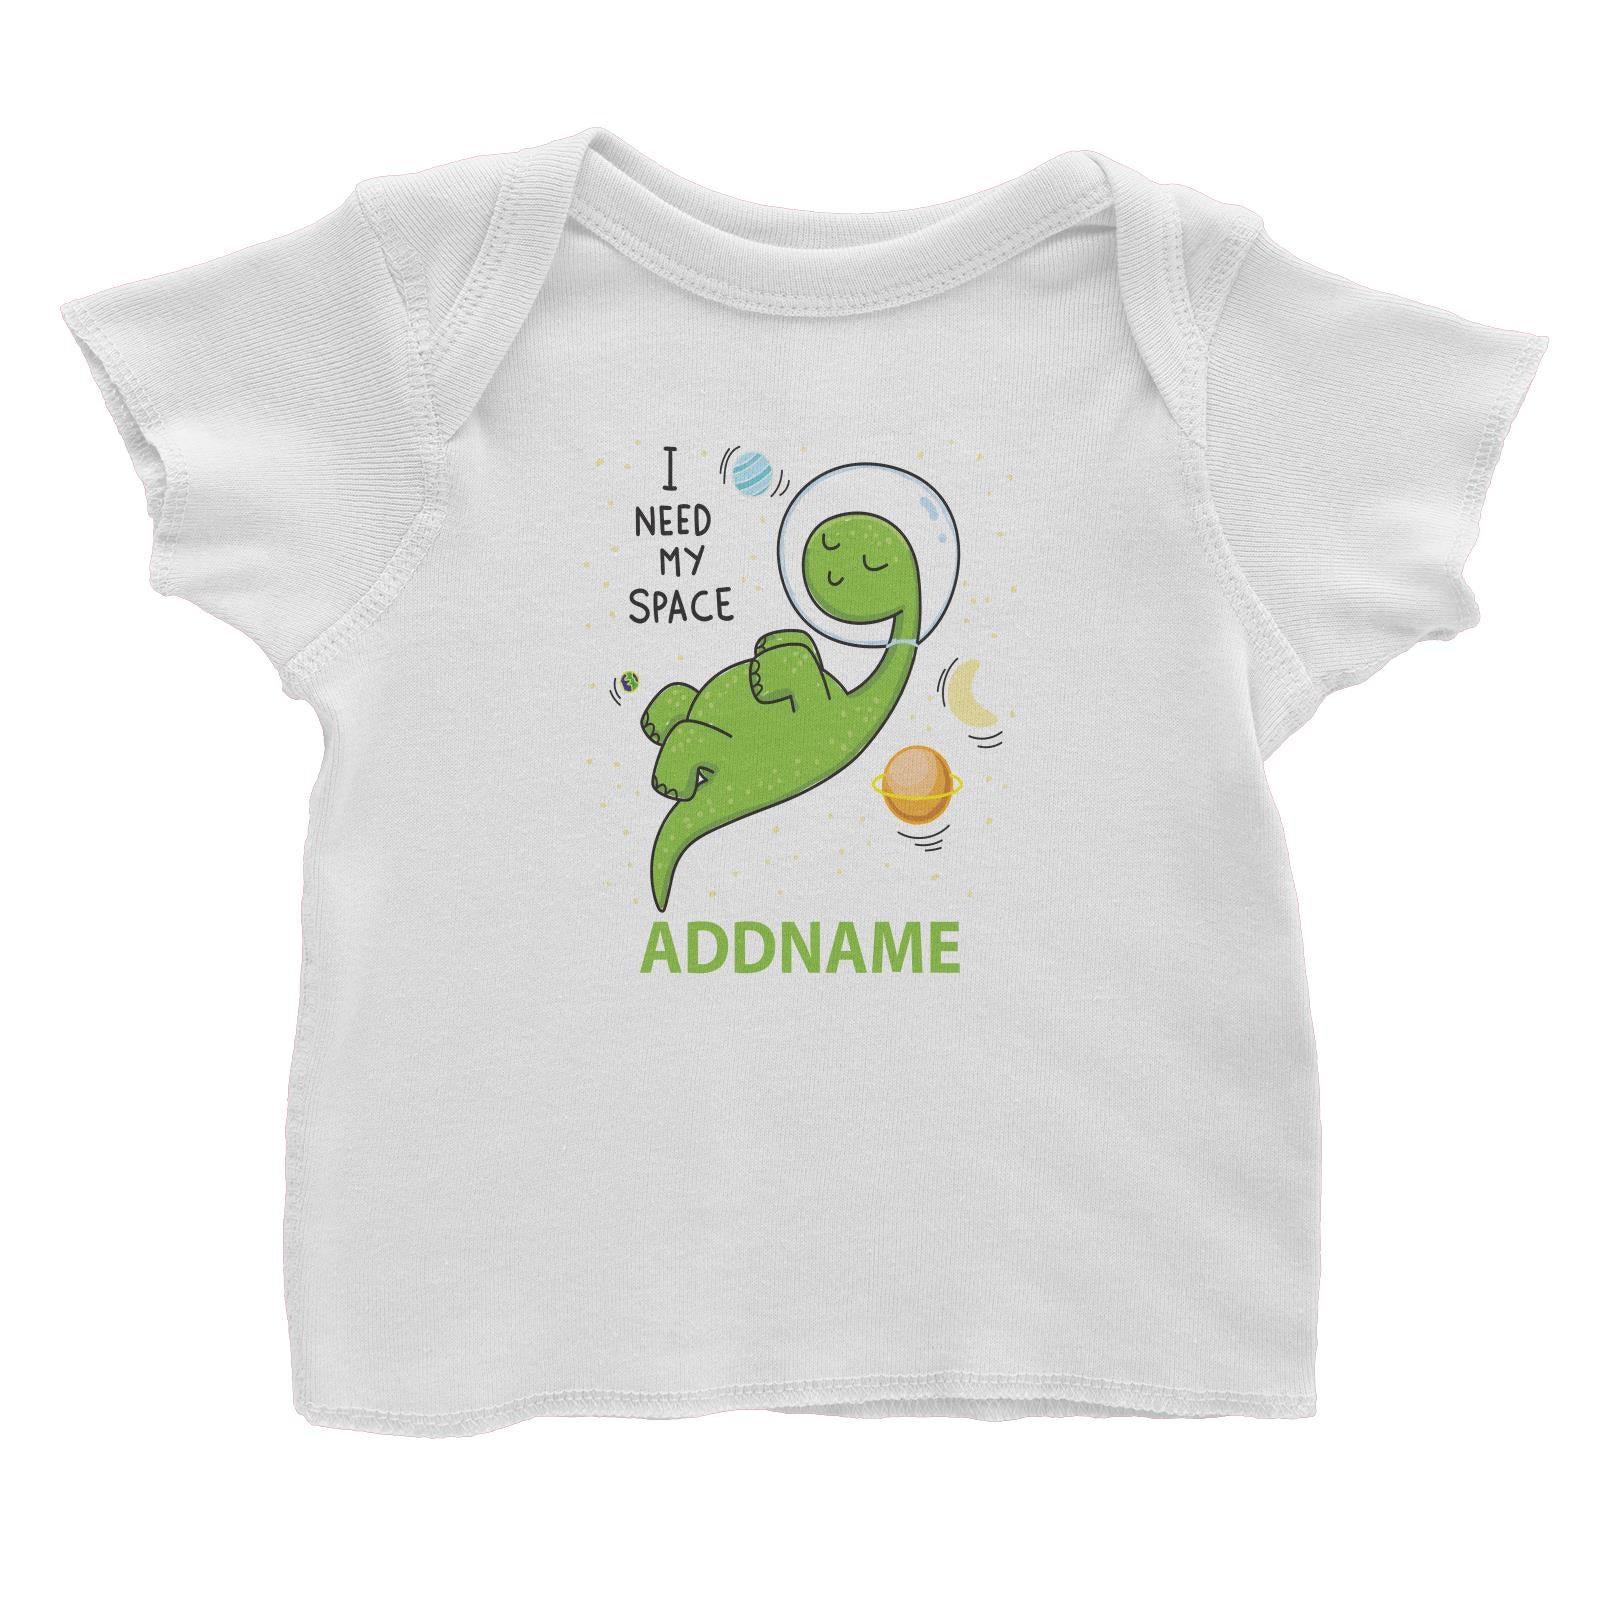 Cool Cute Dinosaur I Need My Space Addname Baby T-Shirt